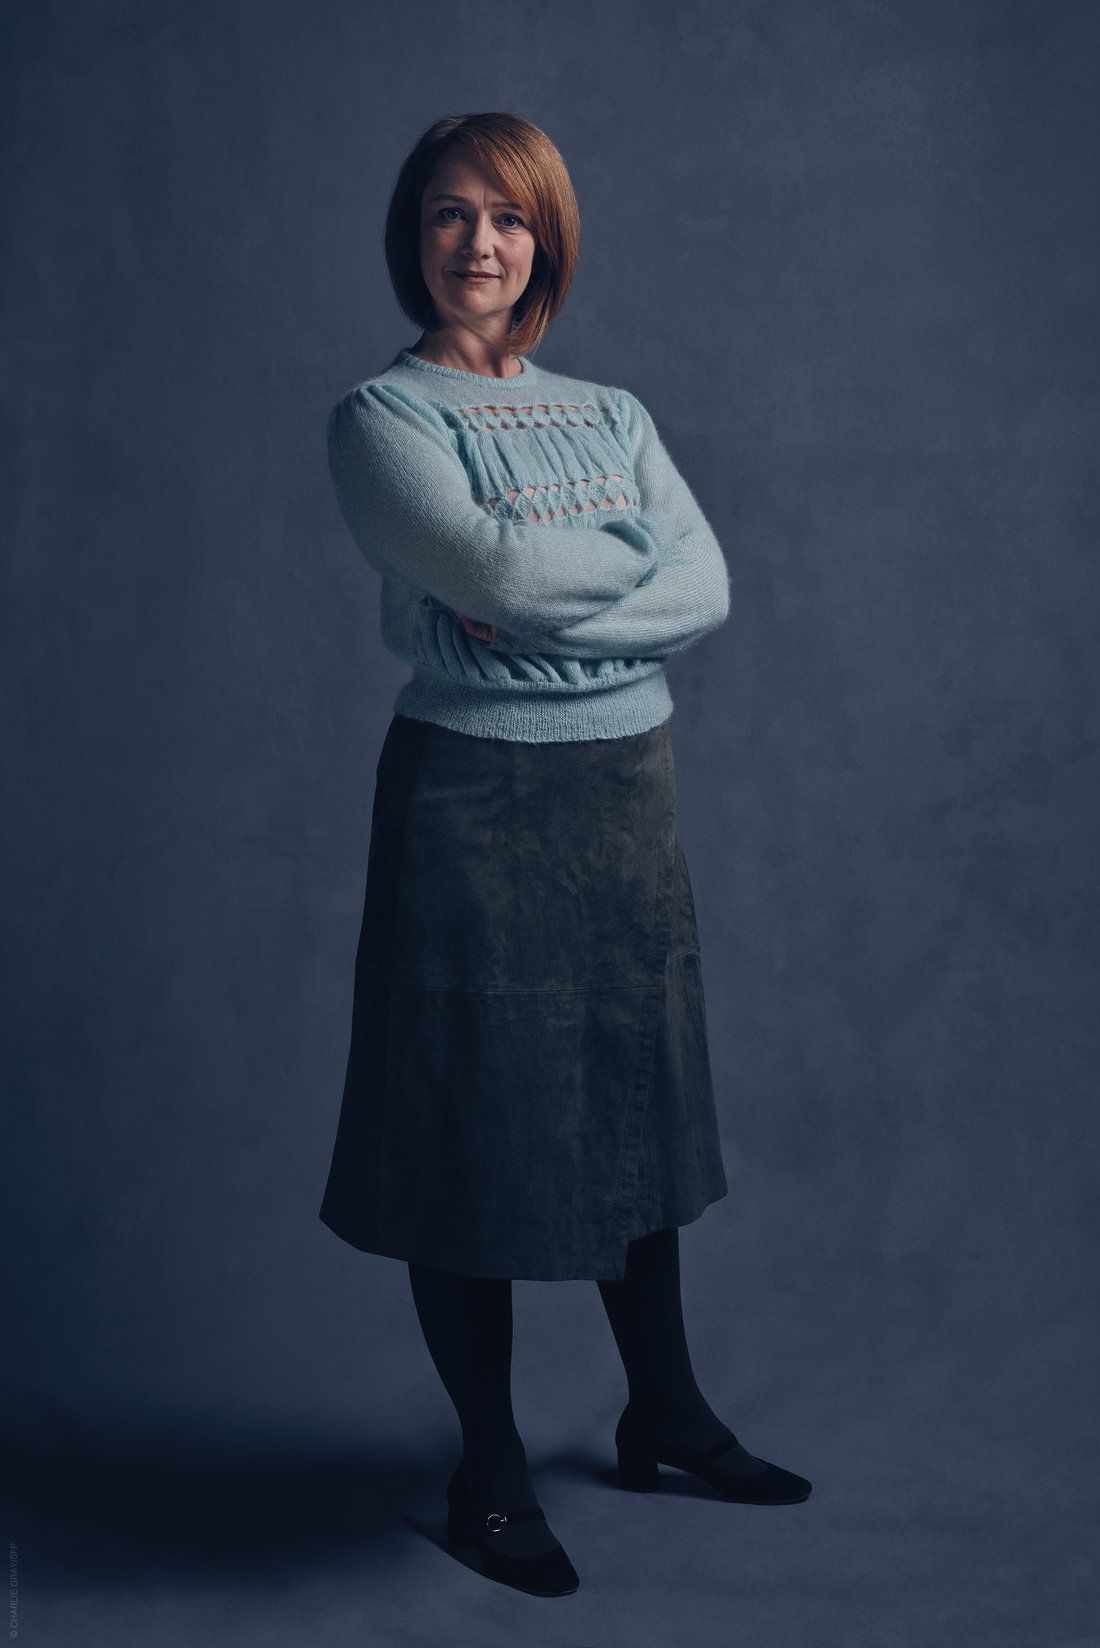 Harry Potter and the Cursed Child Photo 4